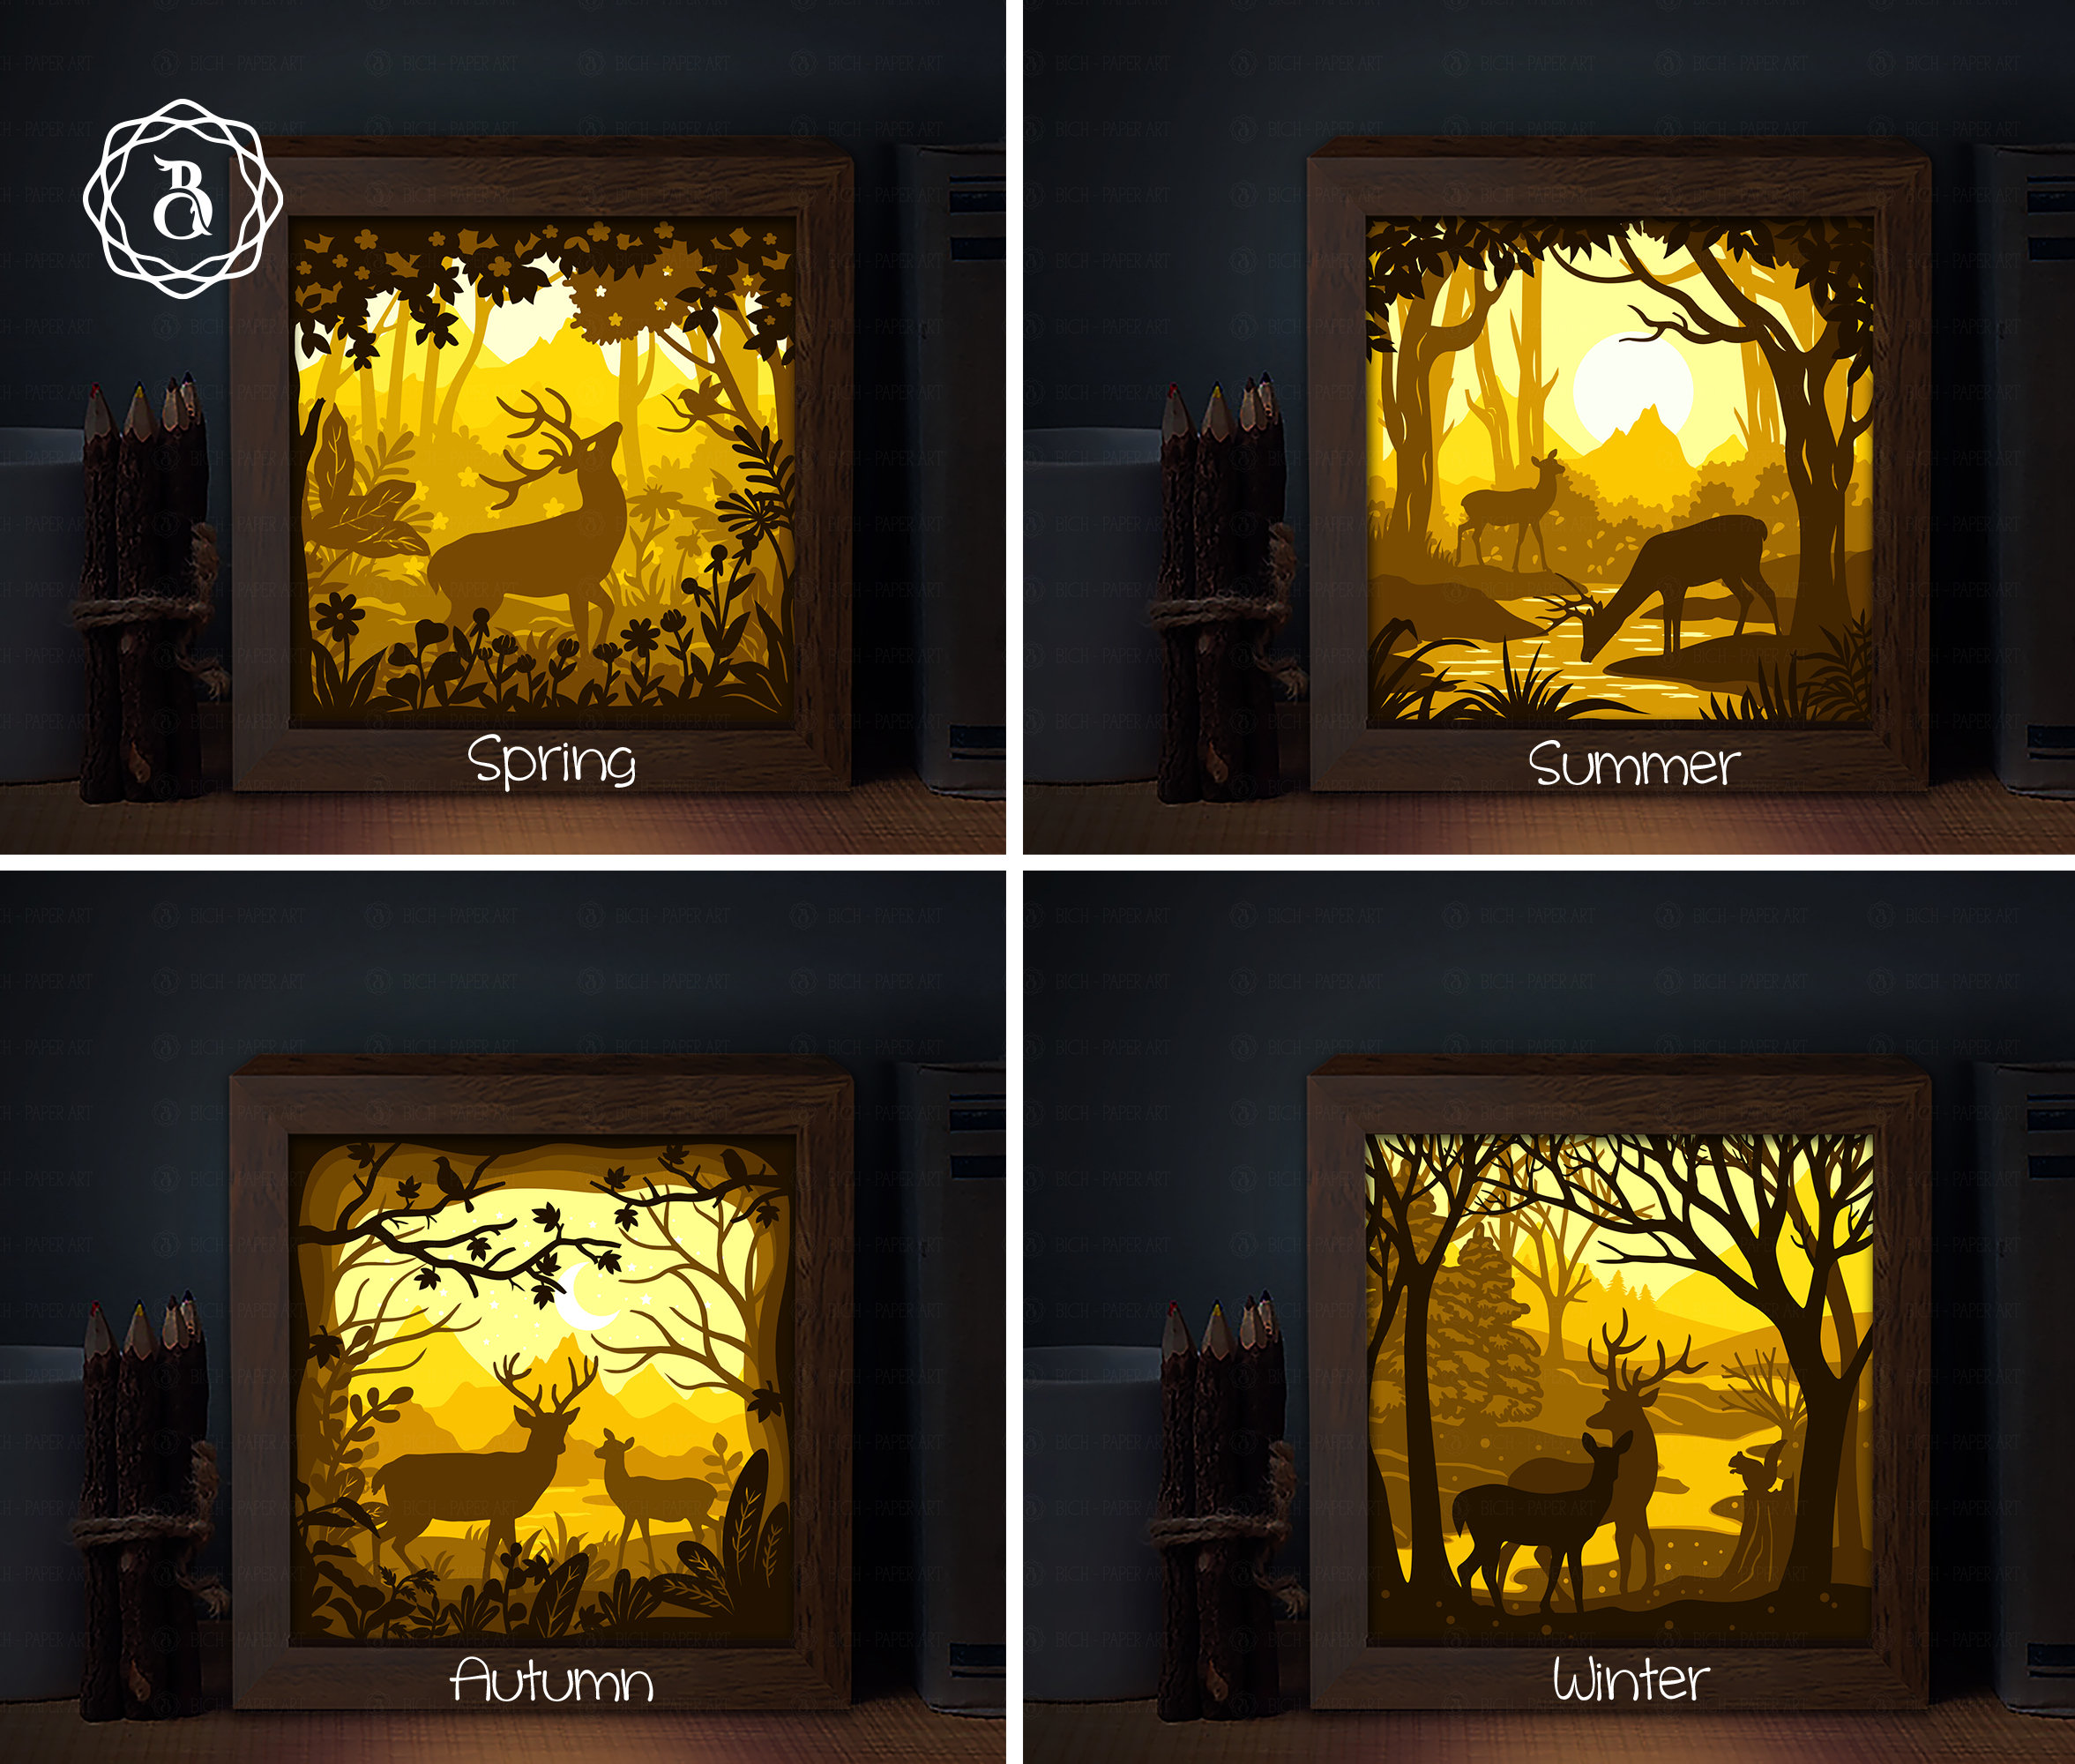 Template designs to create a 3D light boxes of landscapes in the world